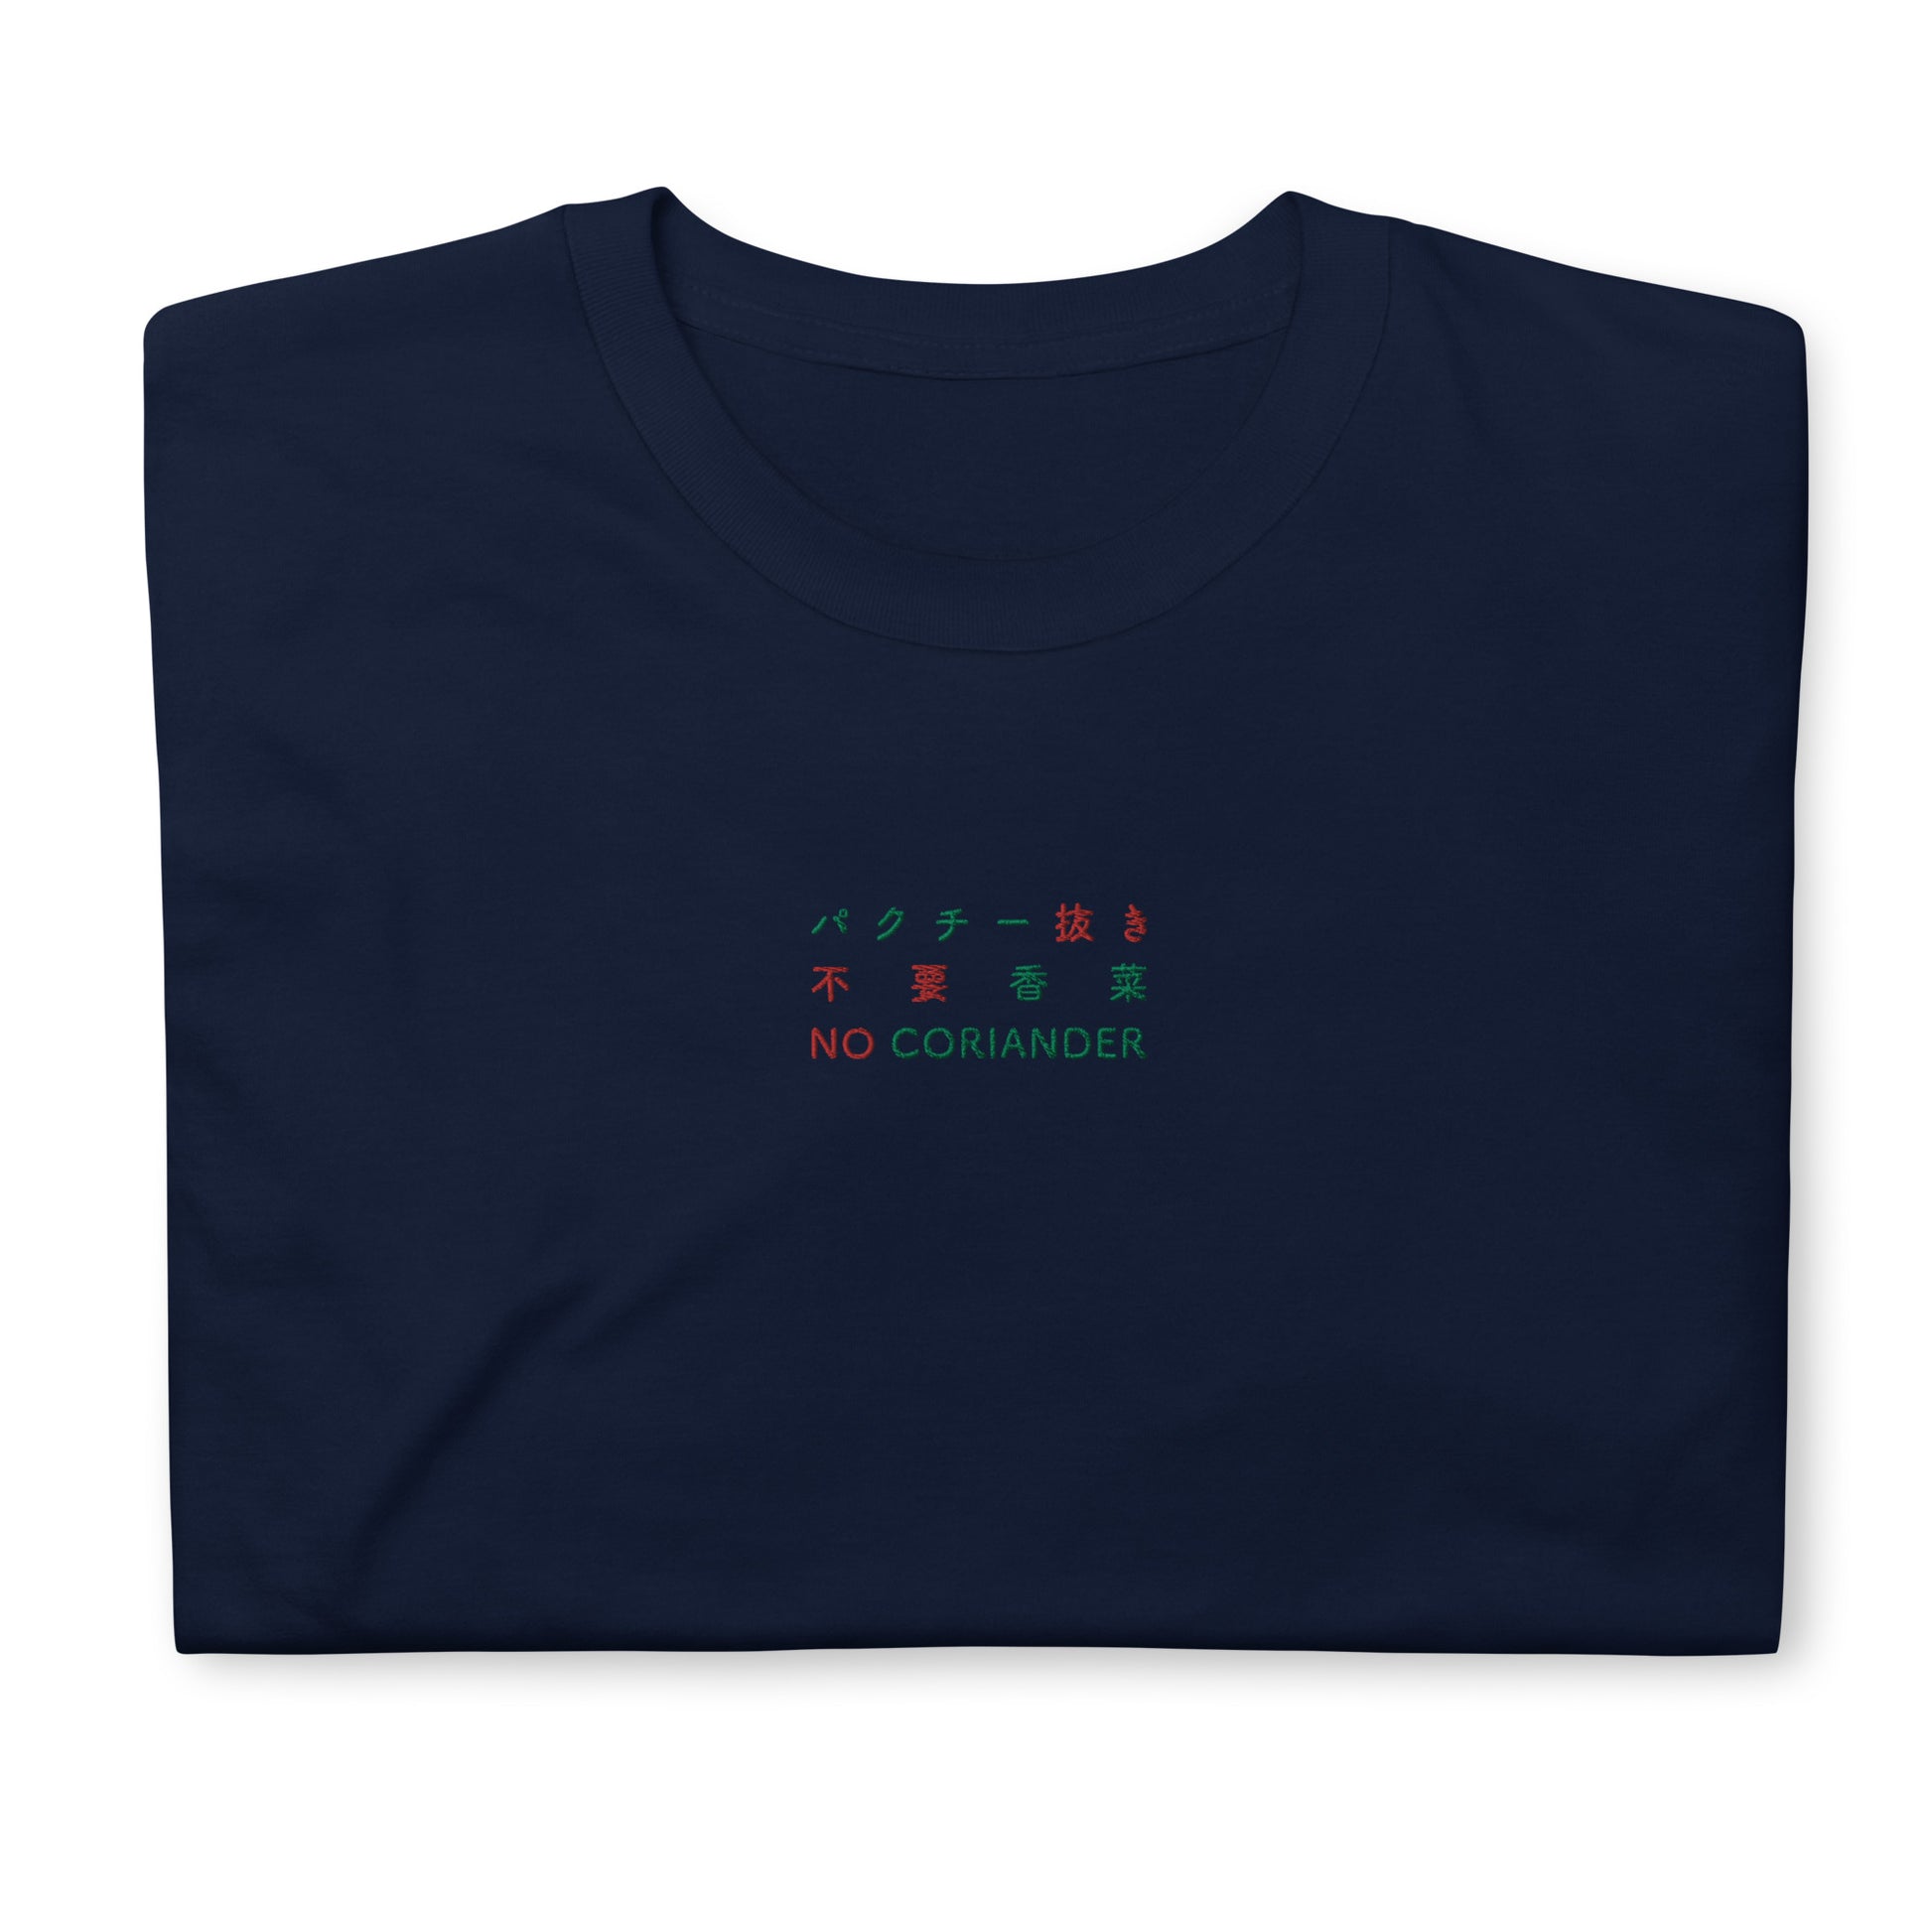 Navy High Quality Tee - Front Design with Red/Green Embroidery "NO CORIANDER" in three languages